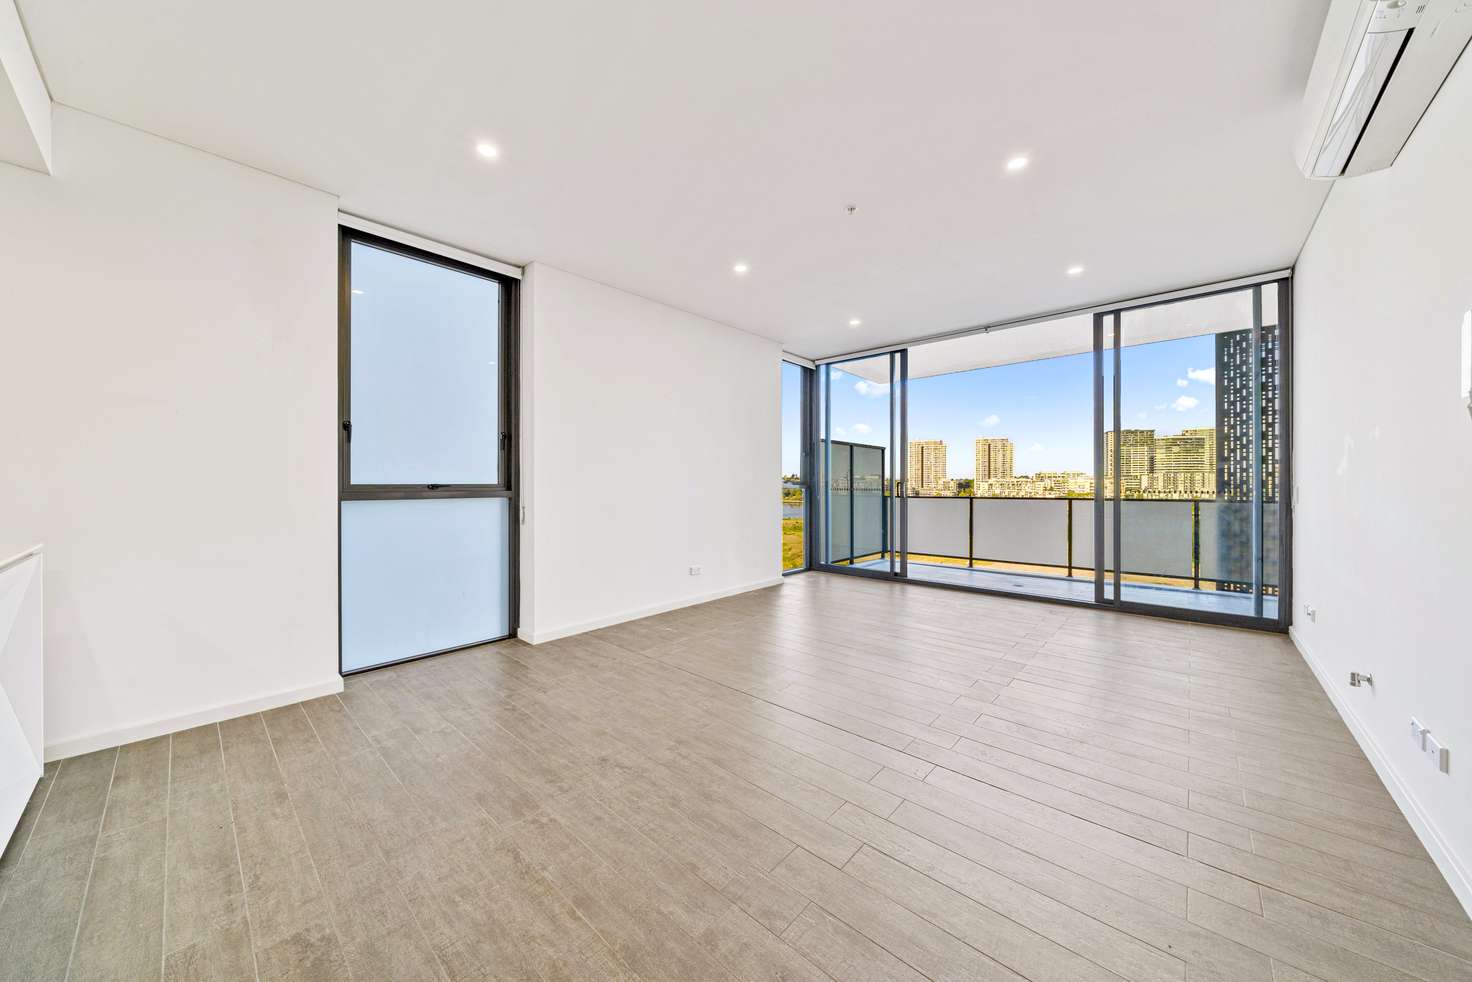 Main view of Homely apartment listing, 849/1d Burroway Road, Wentworth Point NSW 2127